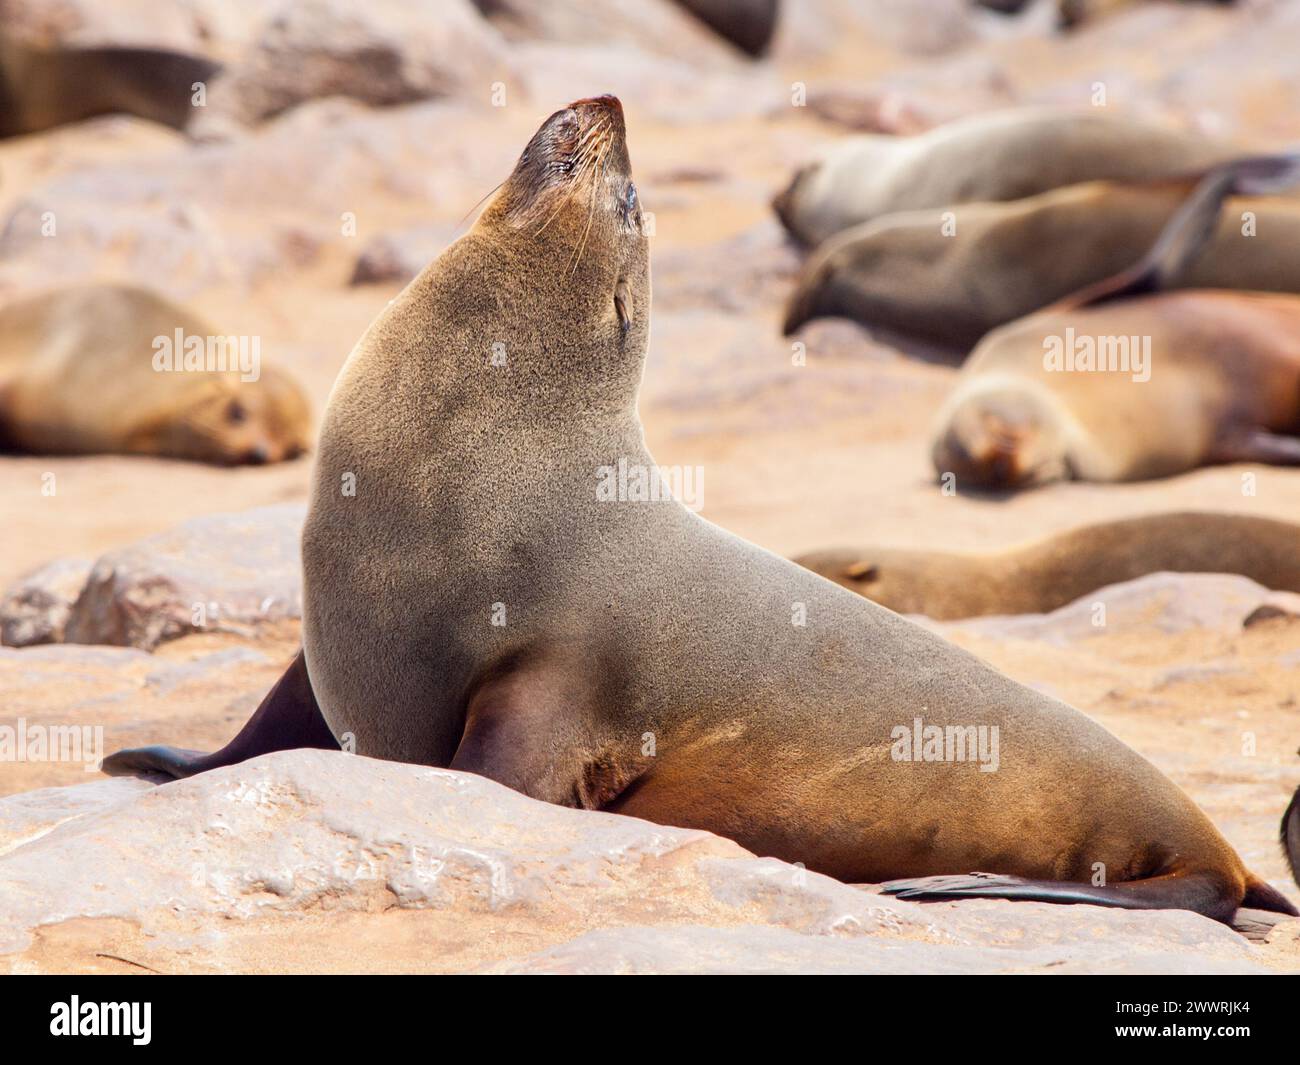 Close-up view of brown fur seal, Cape Cross Colony, Skeleton Coast, Namibia, Africa. Stock Photo